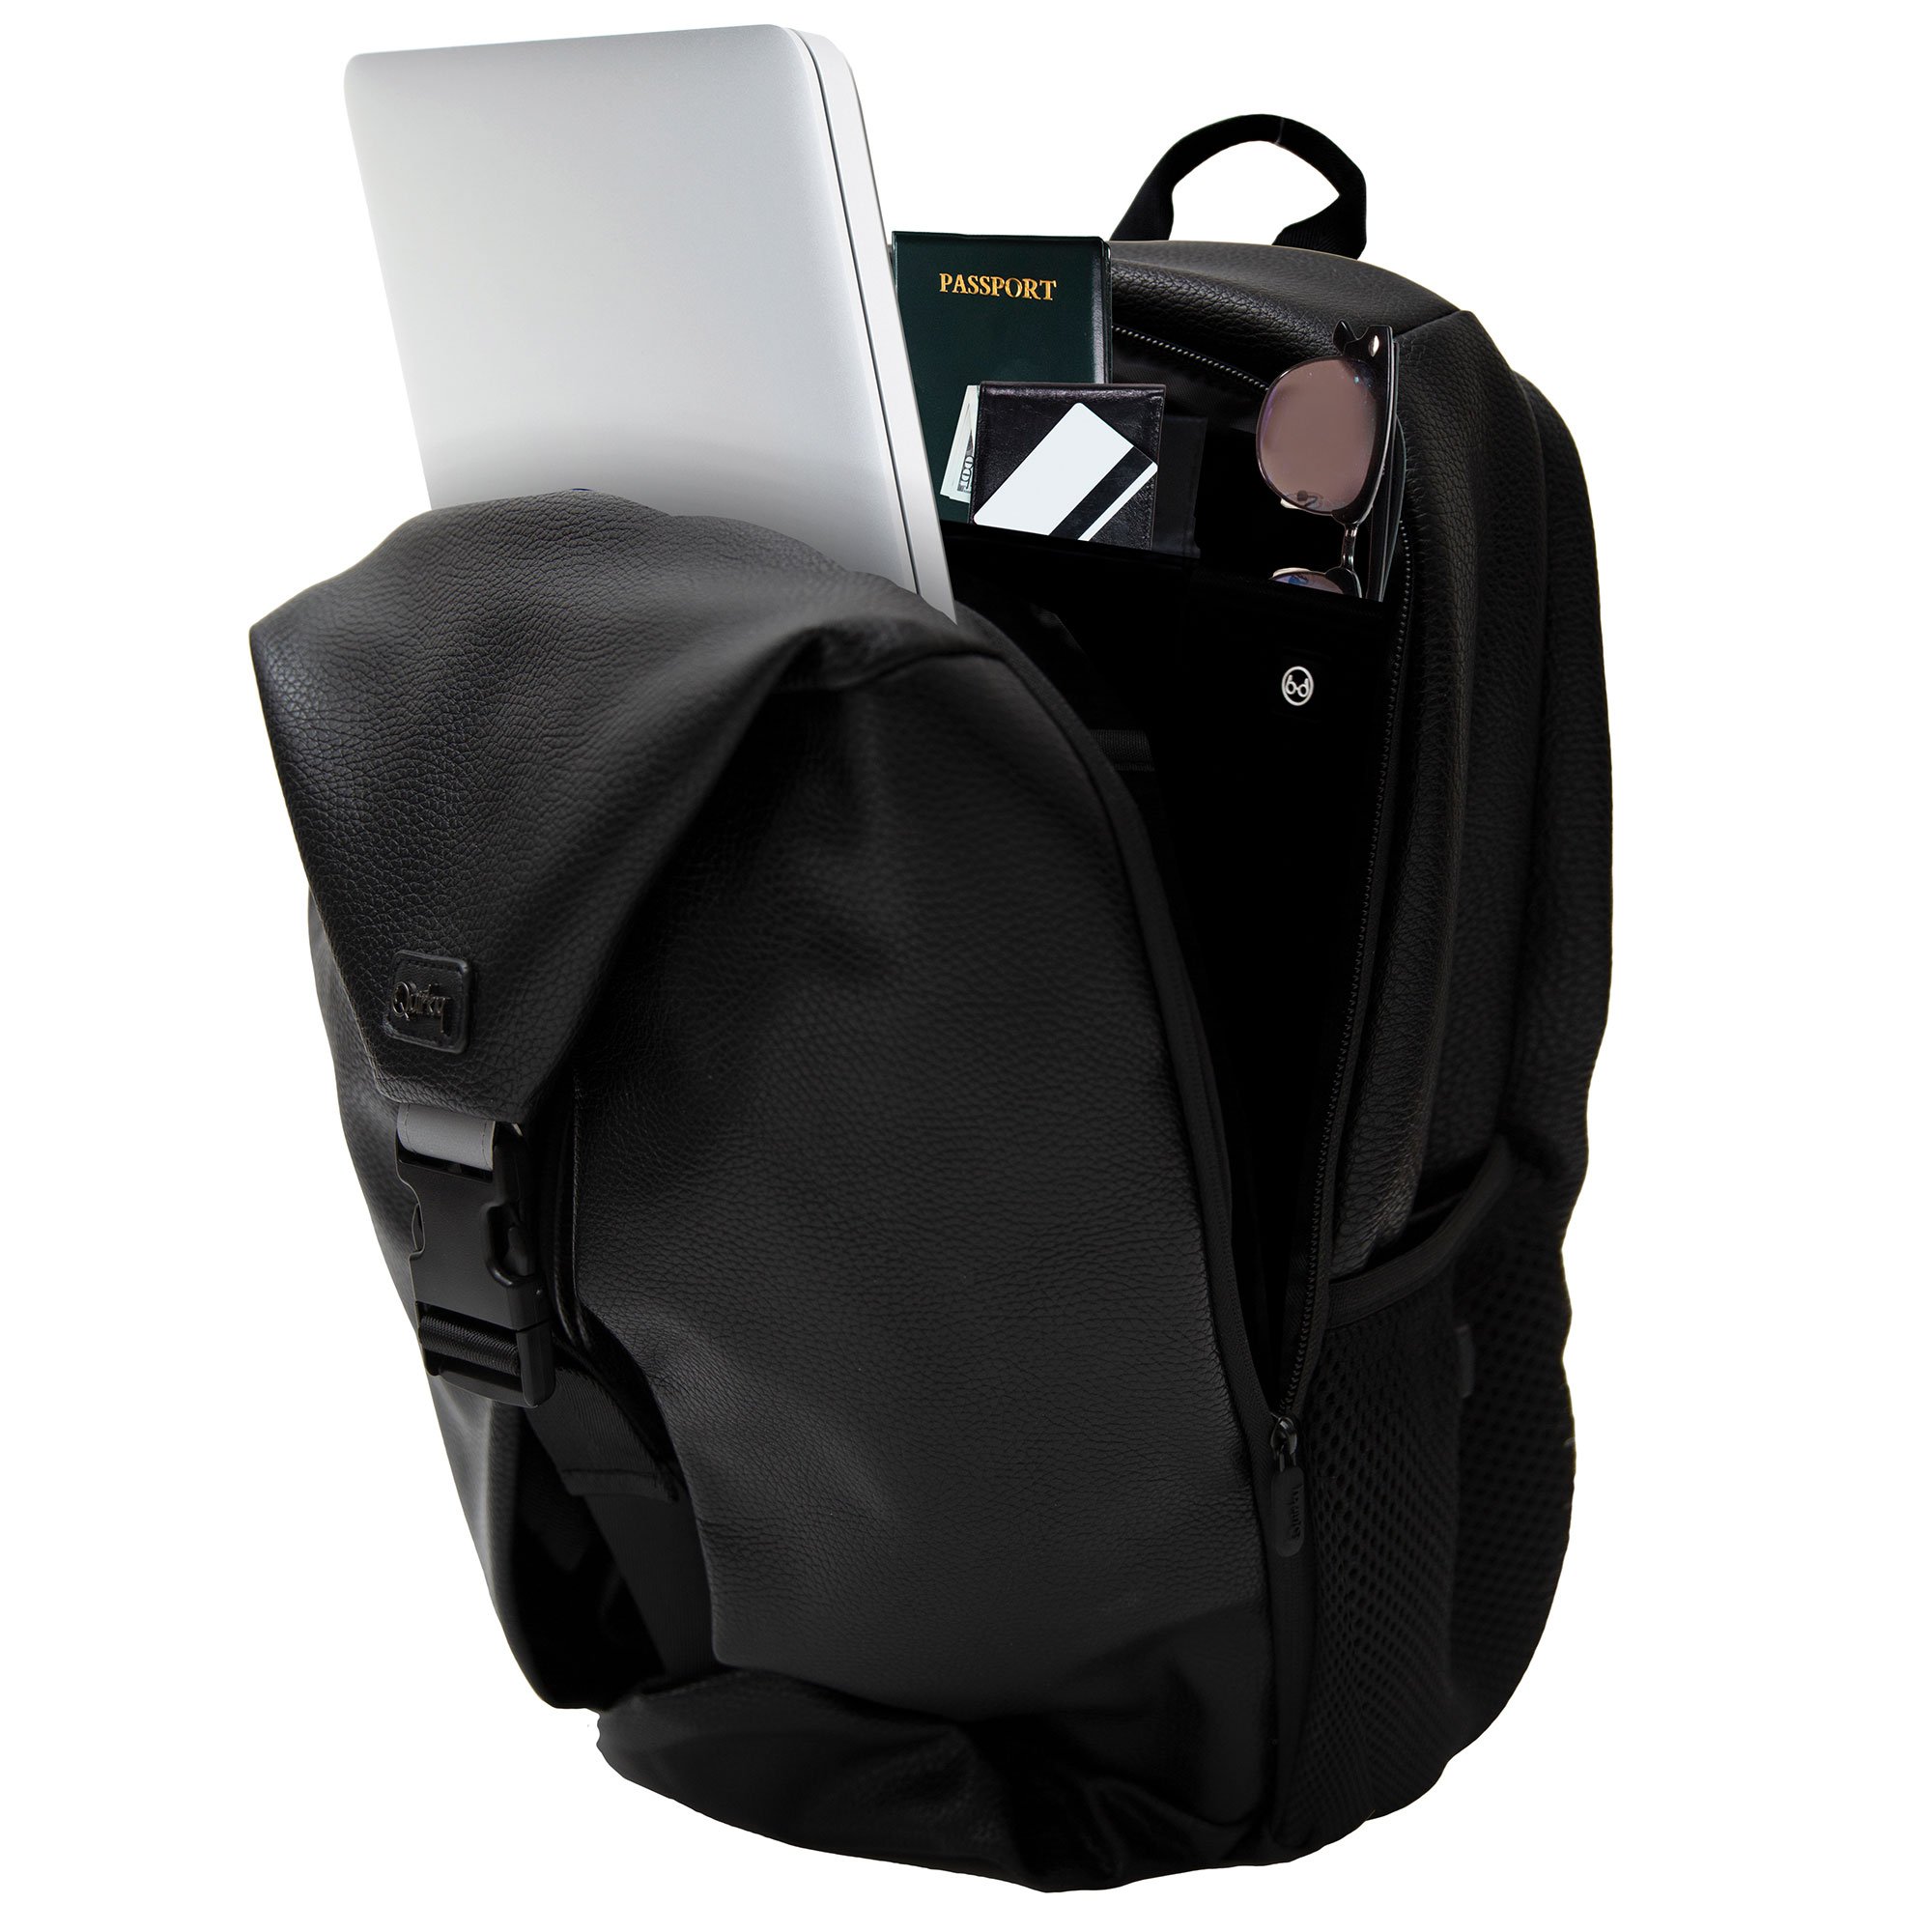 Quirky Convertible Black Backpack with USB Port